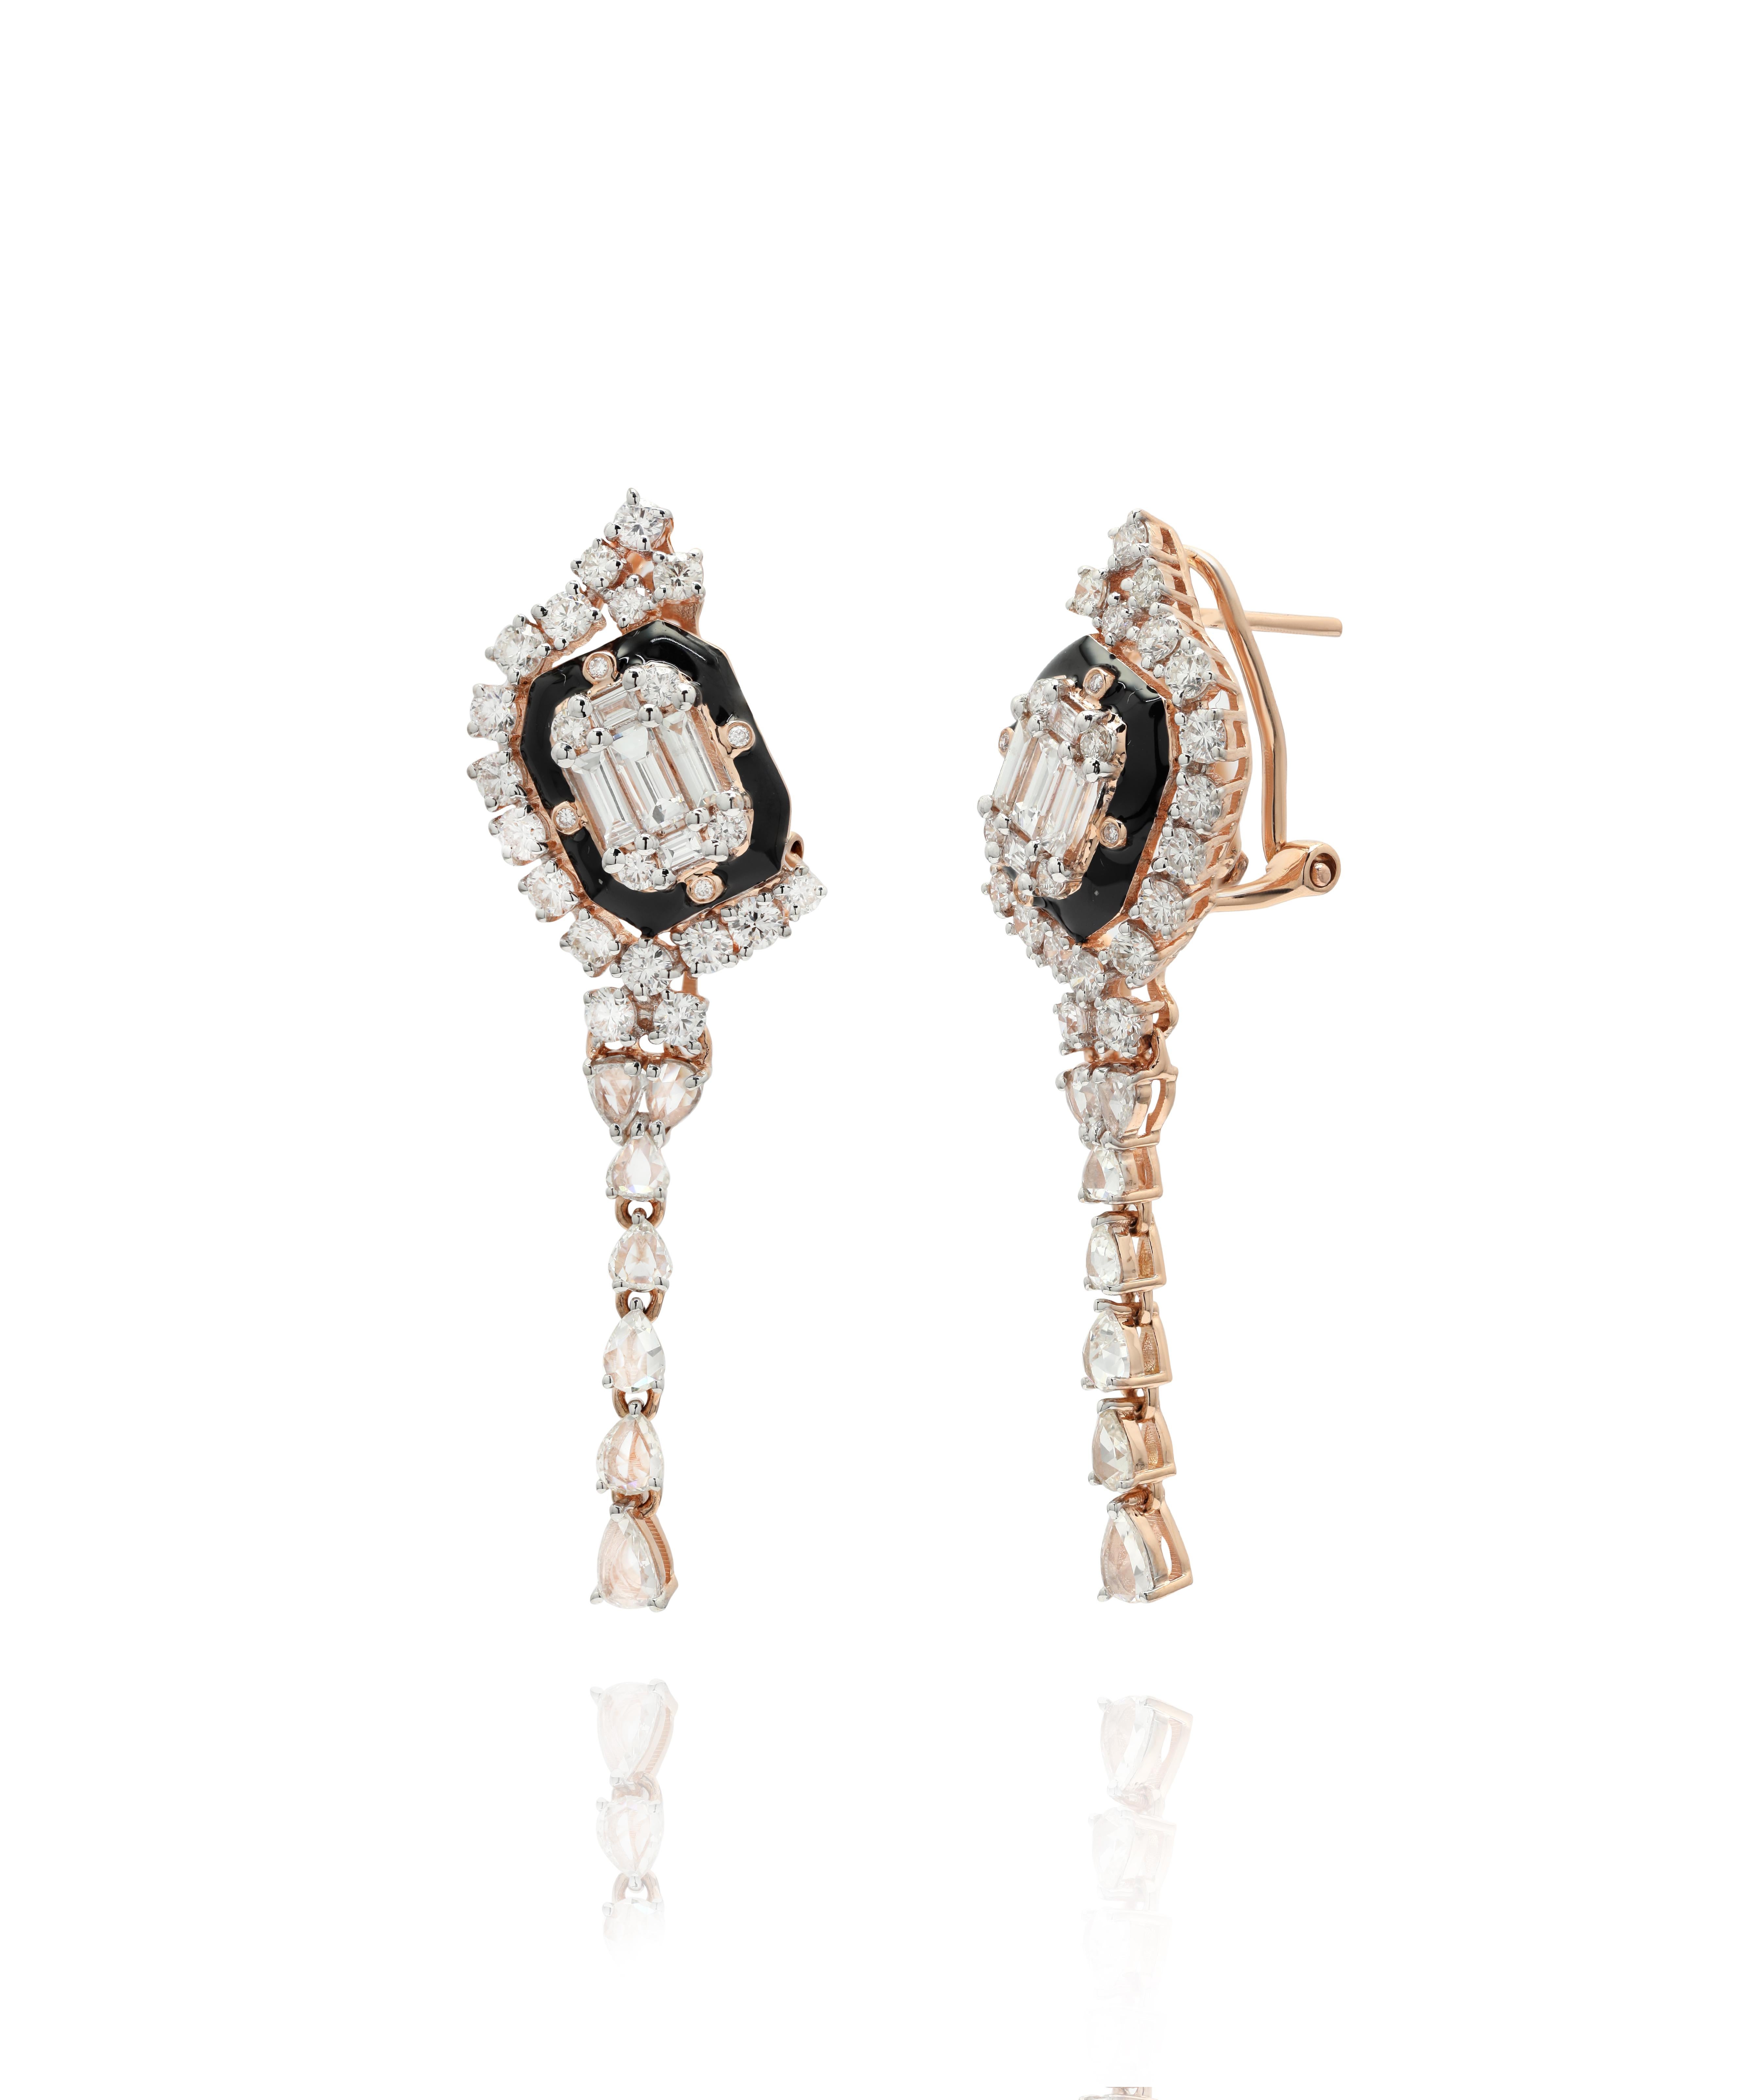 Modern 2.11 cts Diamond and Enamel Cocktail Earrings in 14k Solid Rose Gold For Sale